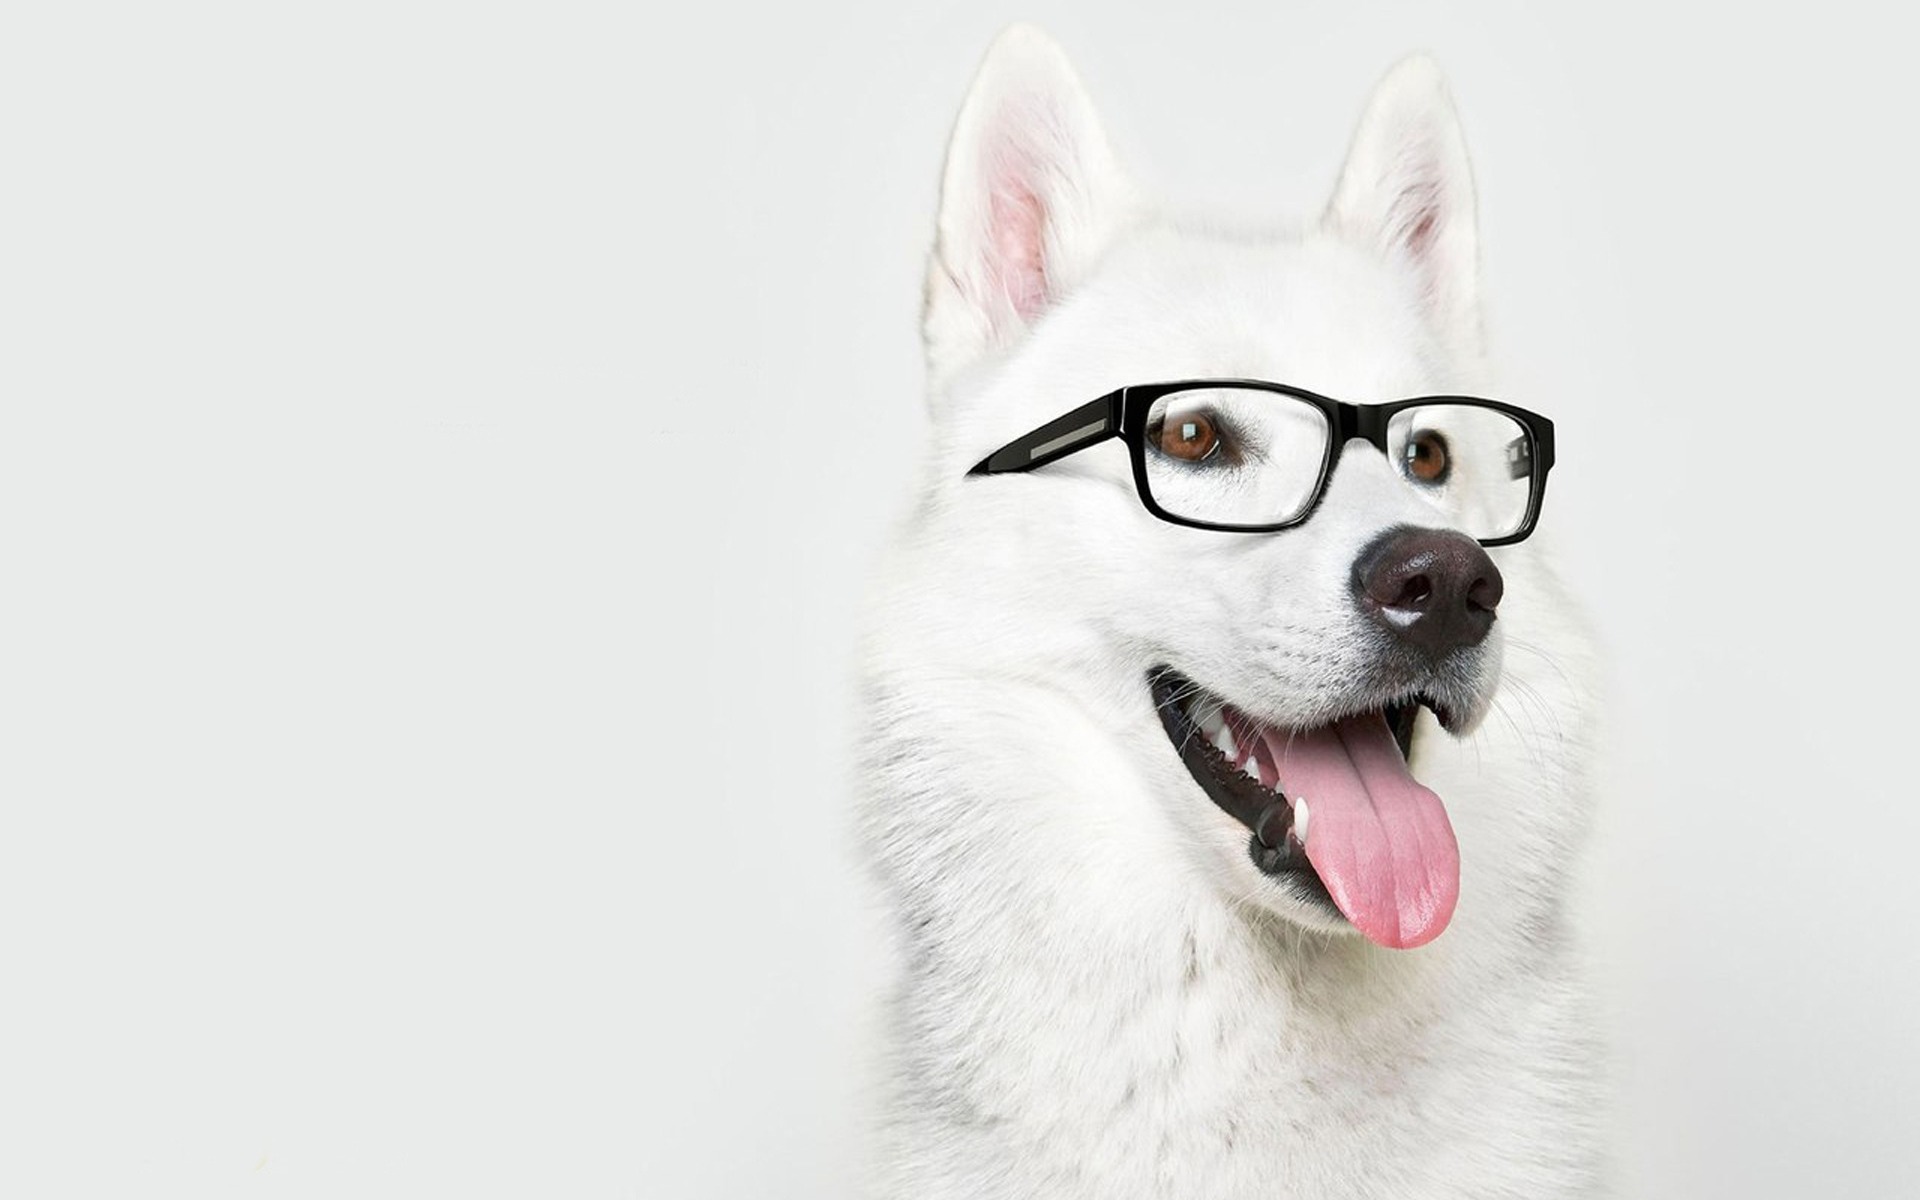 Dog with Glasses wallpapers and images - wallpapers, pictures, photos